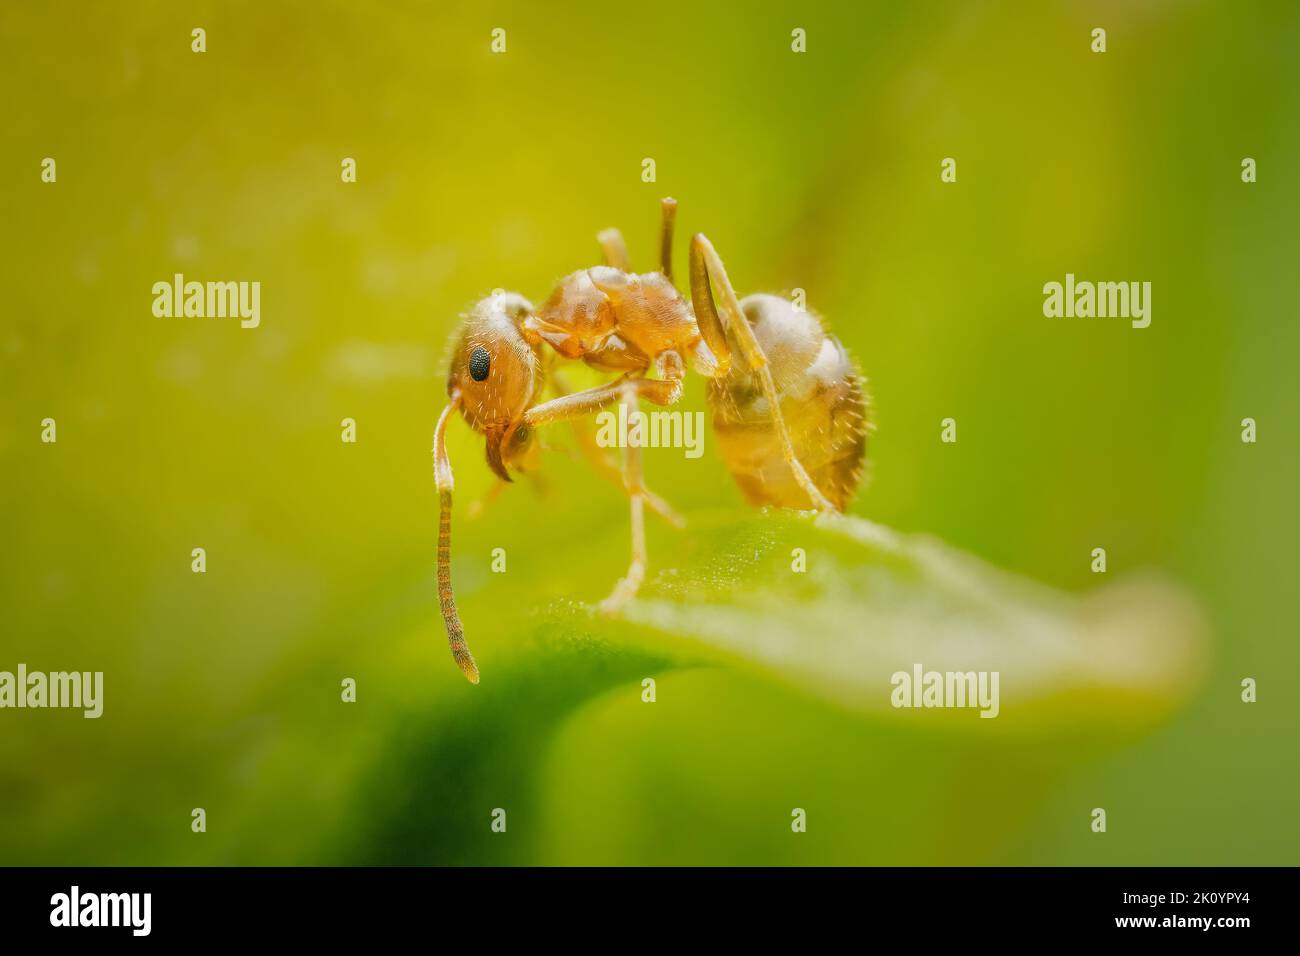 Small ant cleaning up on a leaf with blurred green and yellow background Stock Photo